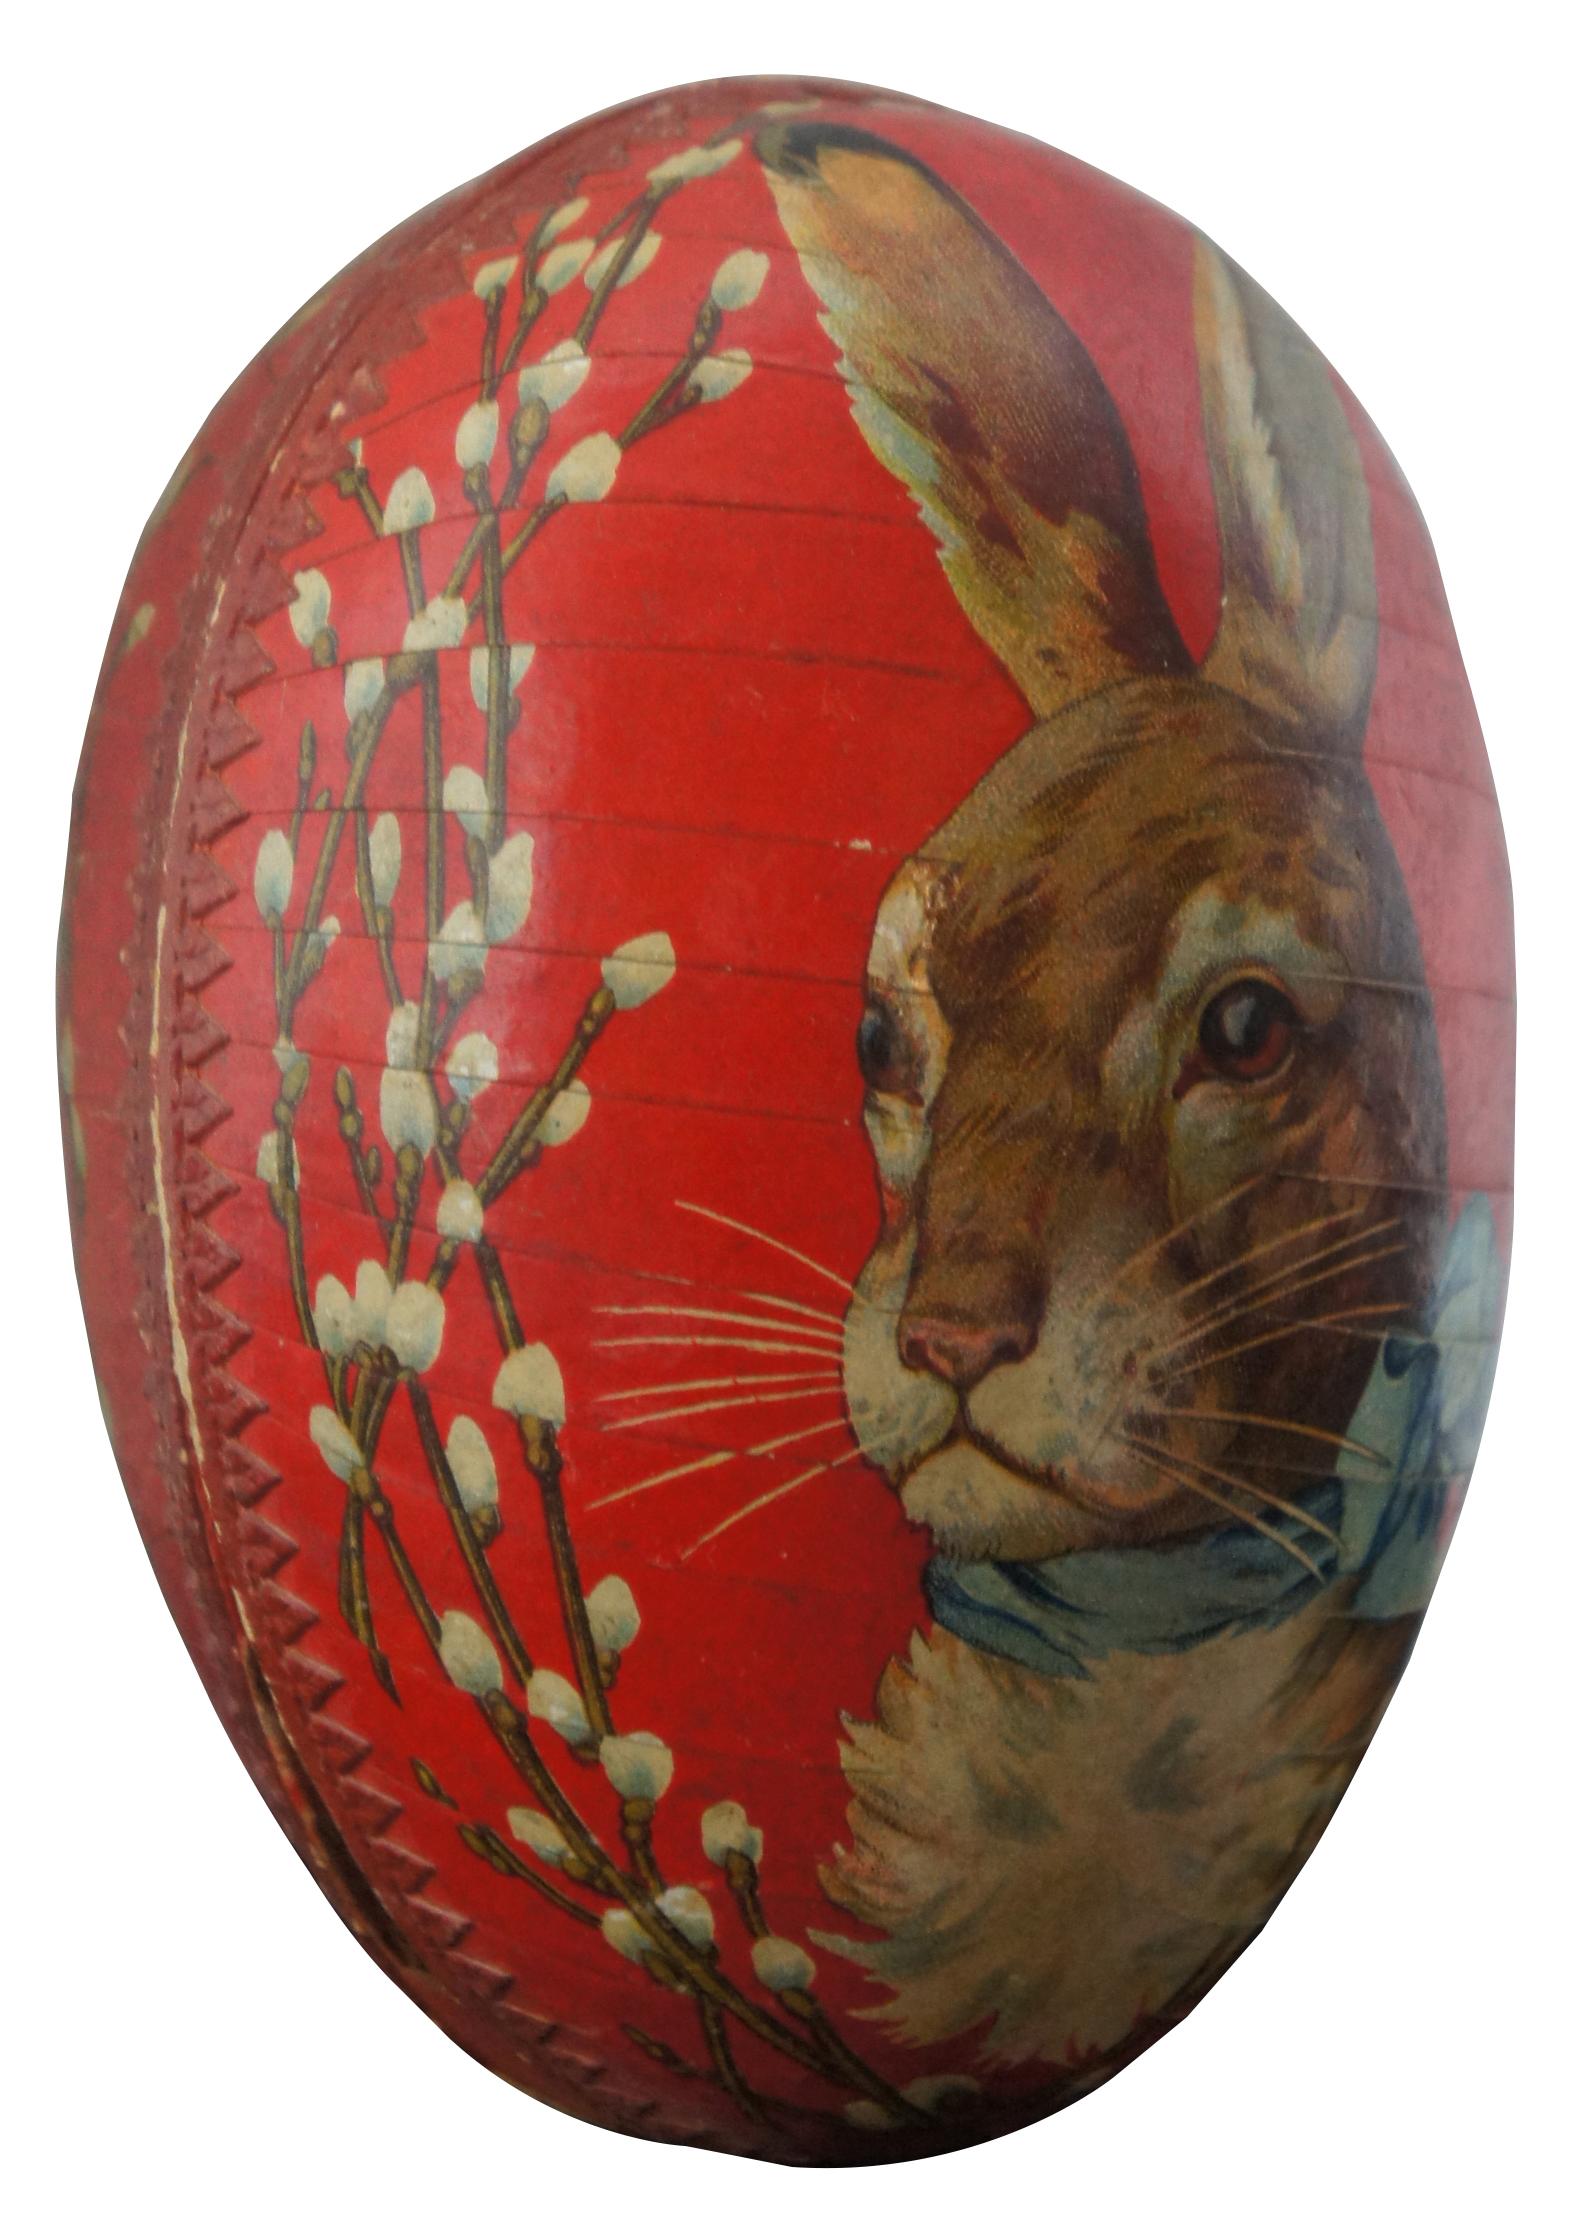 Antique German papier mâché Easter egg candy container, featuring a lithograph of a rabbit wearing a blue bow, framed by pussy willows, with paper lace trim around the inside edge. Measure: 4.5